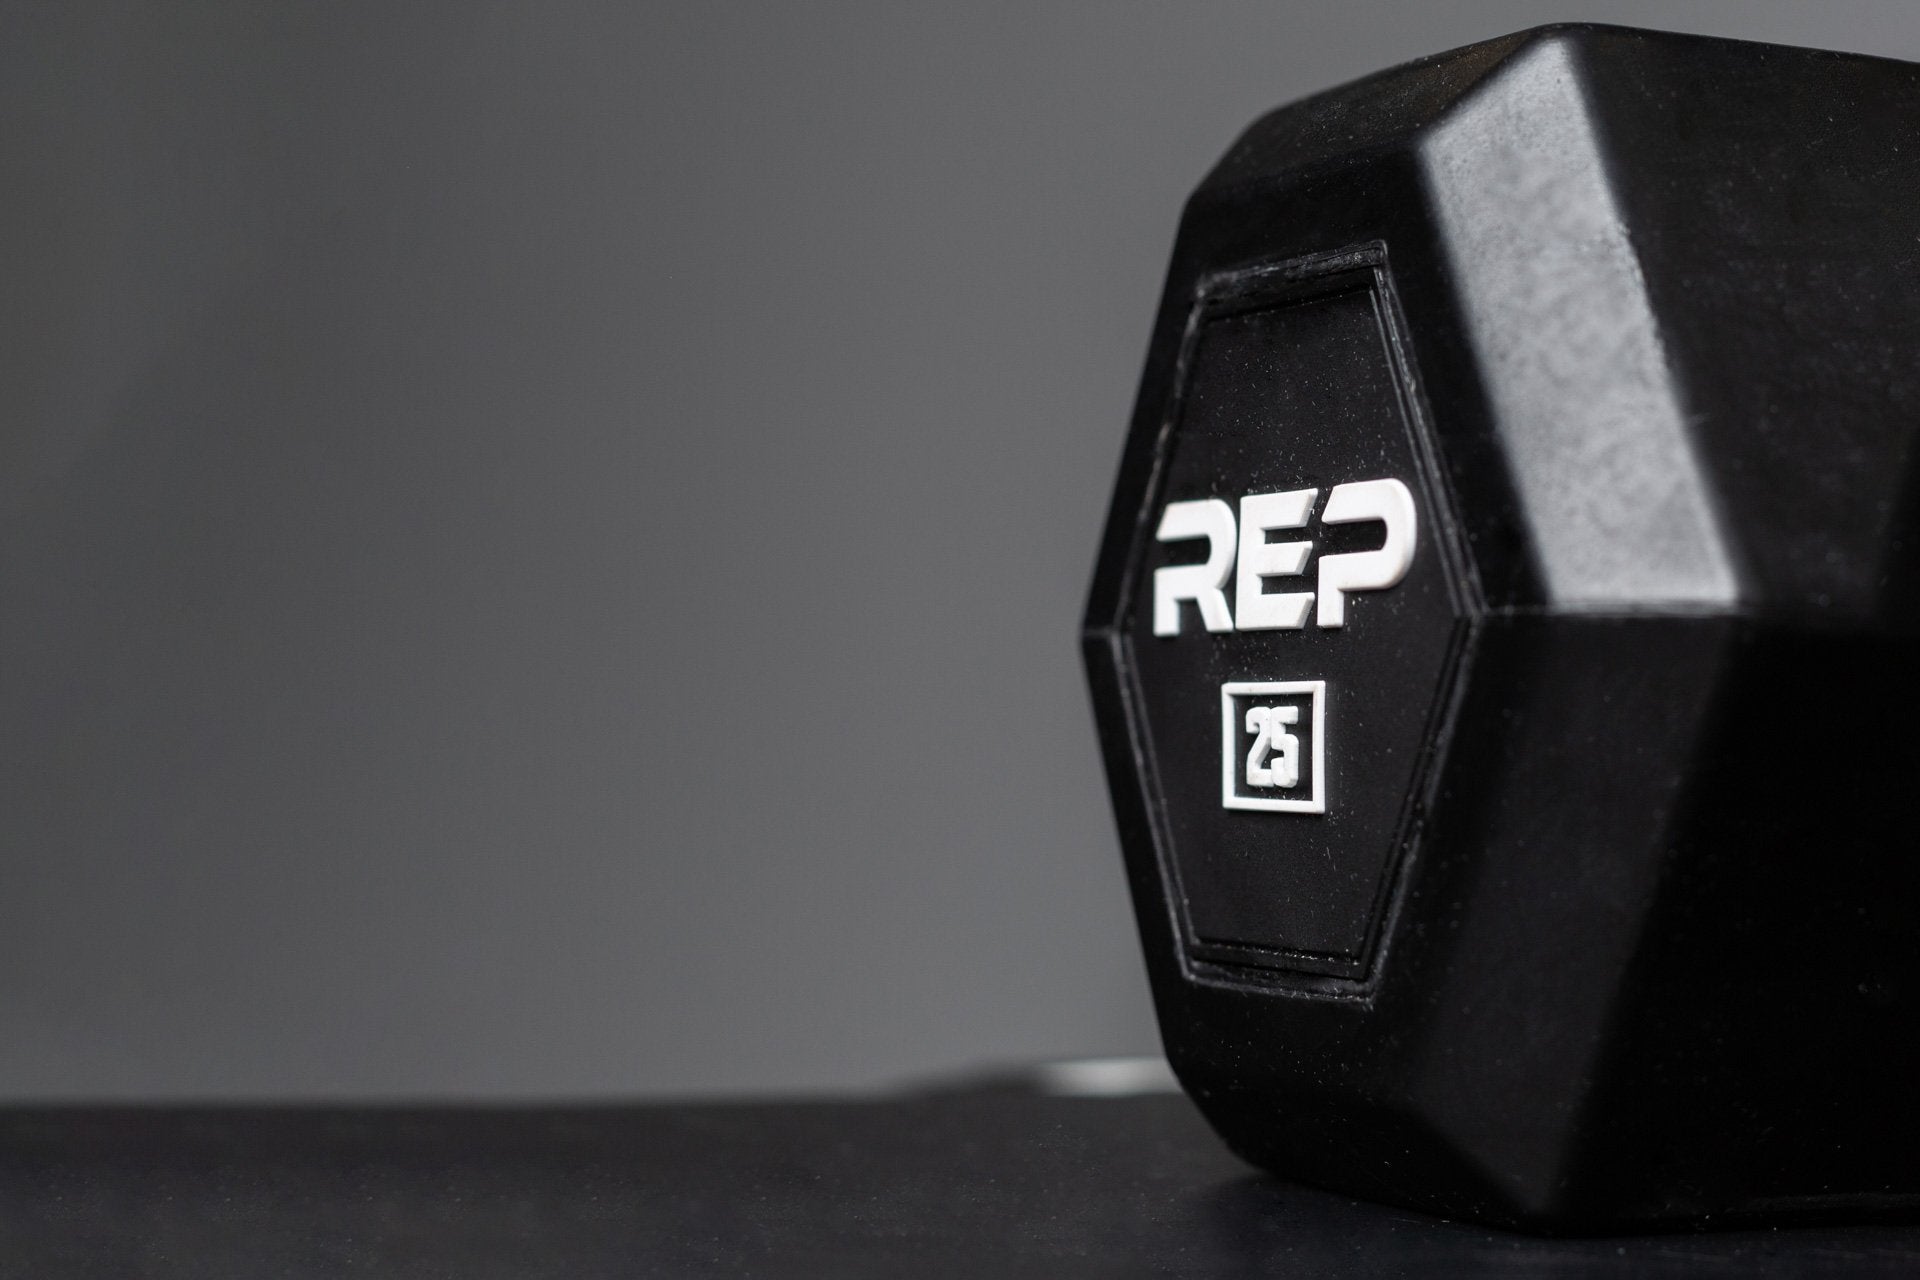 Close-up view of the hexagon head of a 25lb Rubber Coated Hex Dumbbell showing off the white 